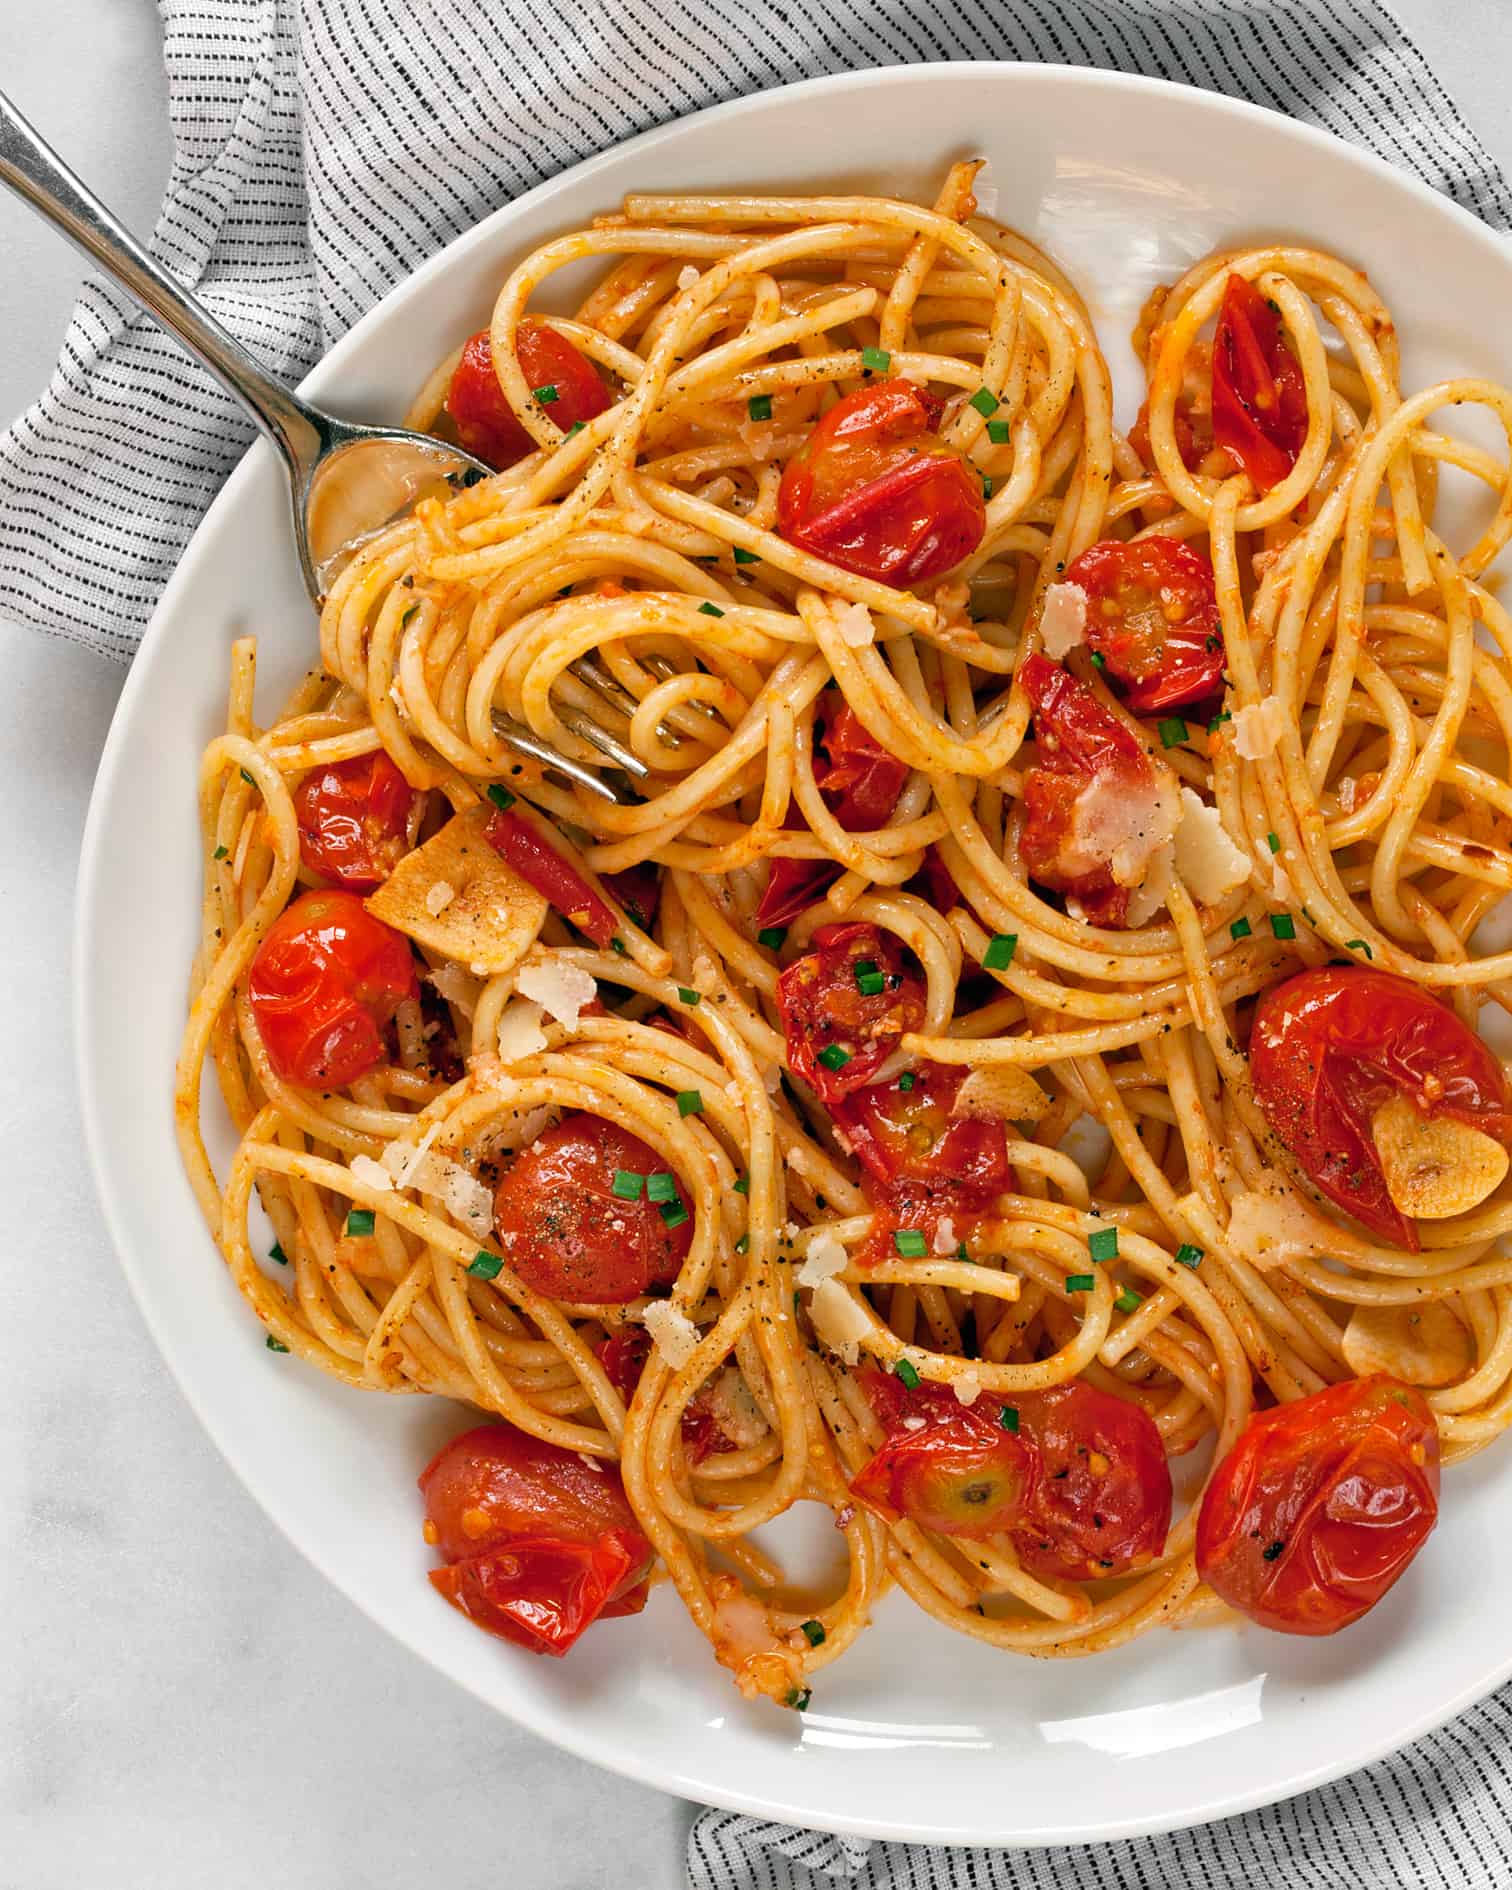 Joy of Cooking's One-Pan Pasta with Tomatoes and Herbs